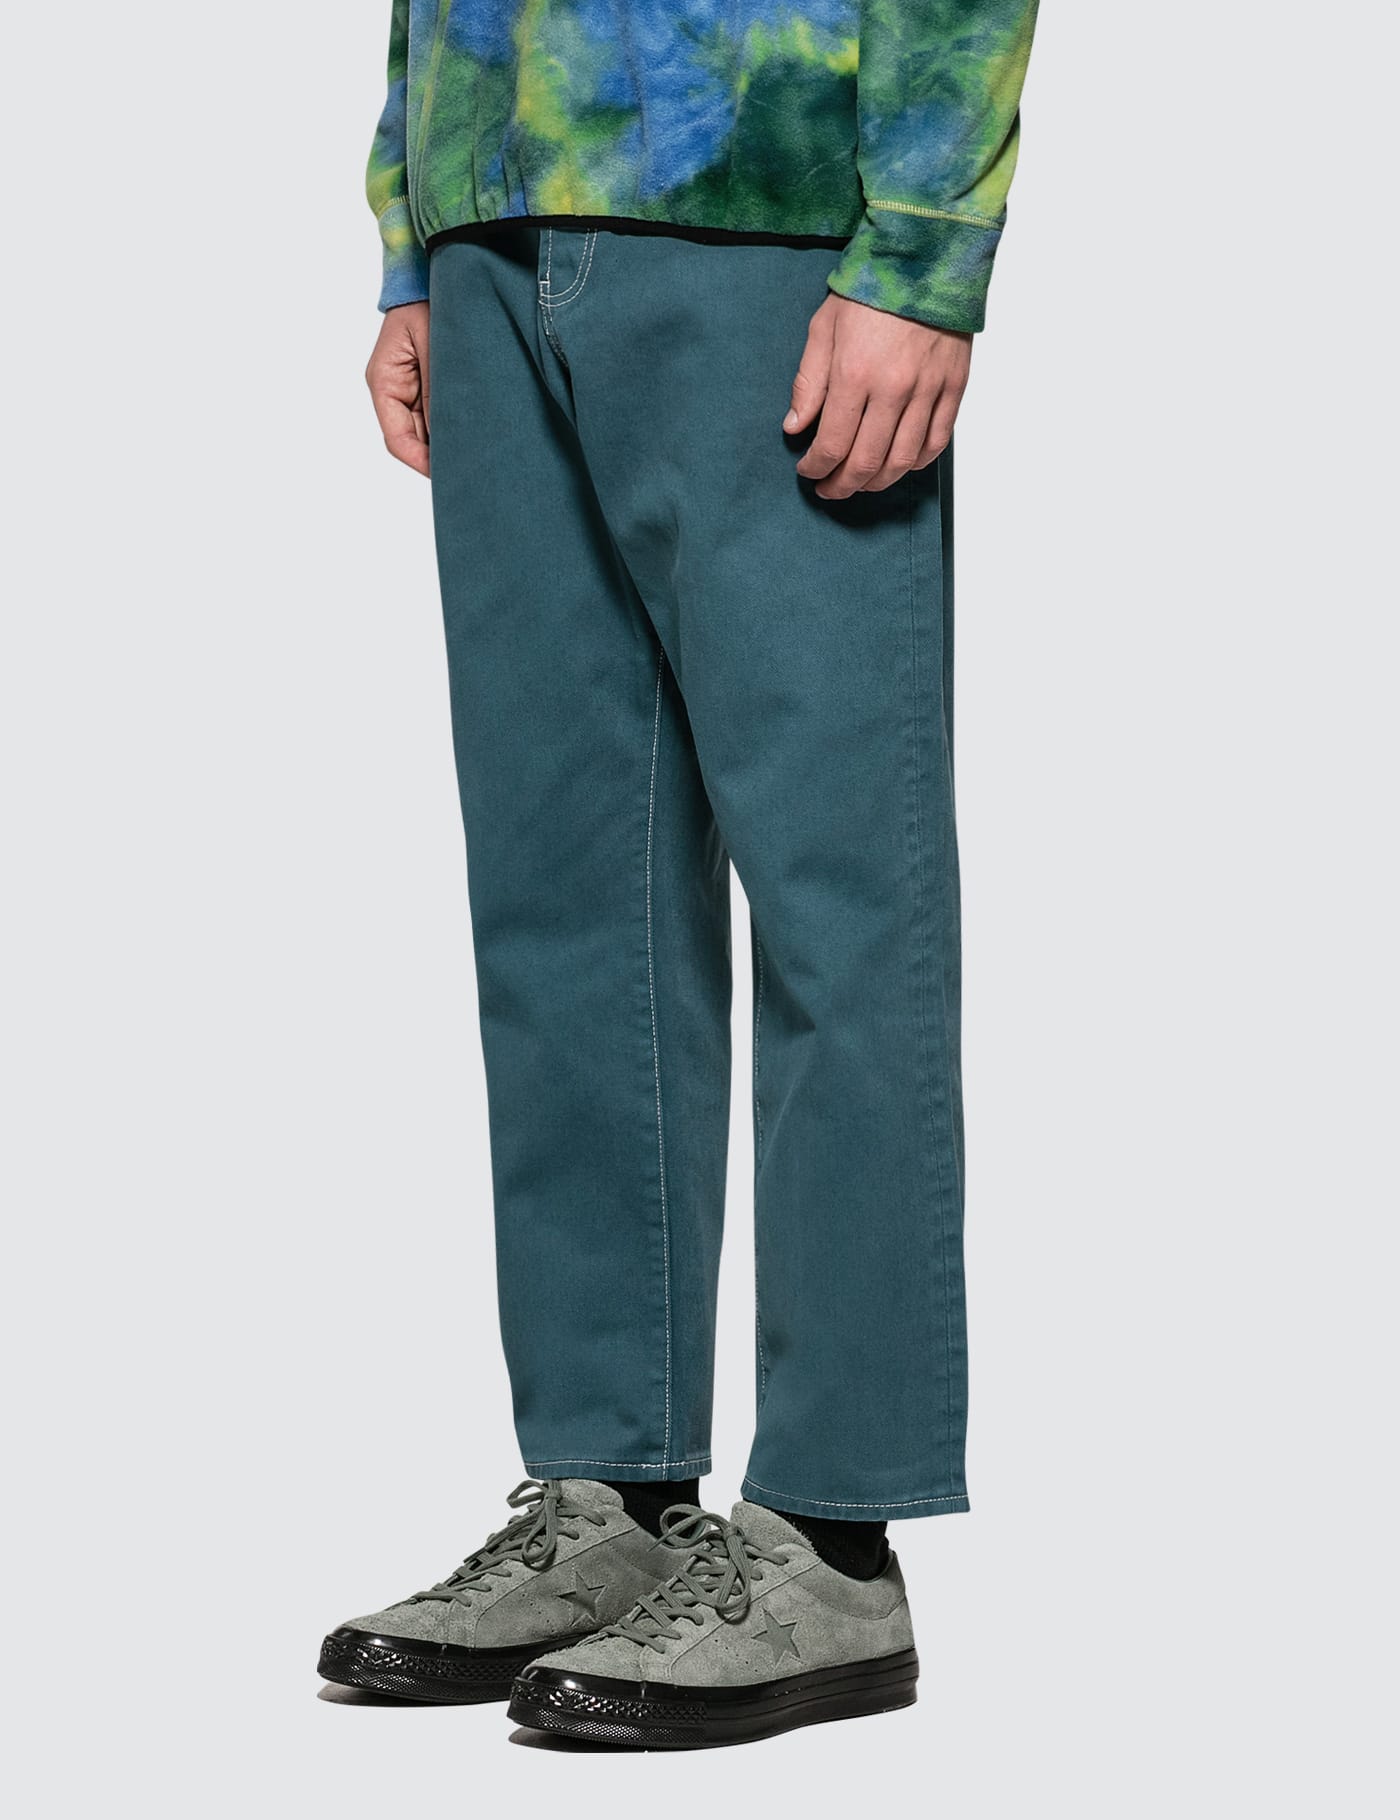 Stüssy - Overdyed Big Ol' Jeans | HBX - Globally Curated Fashion 